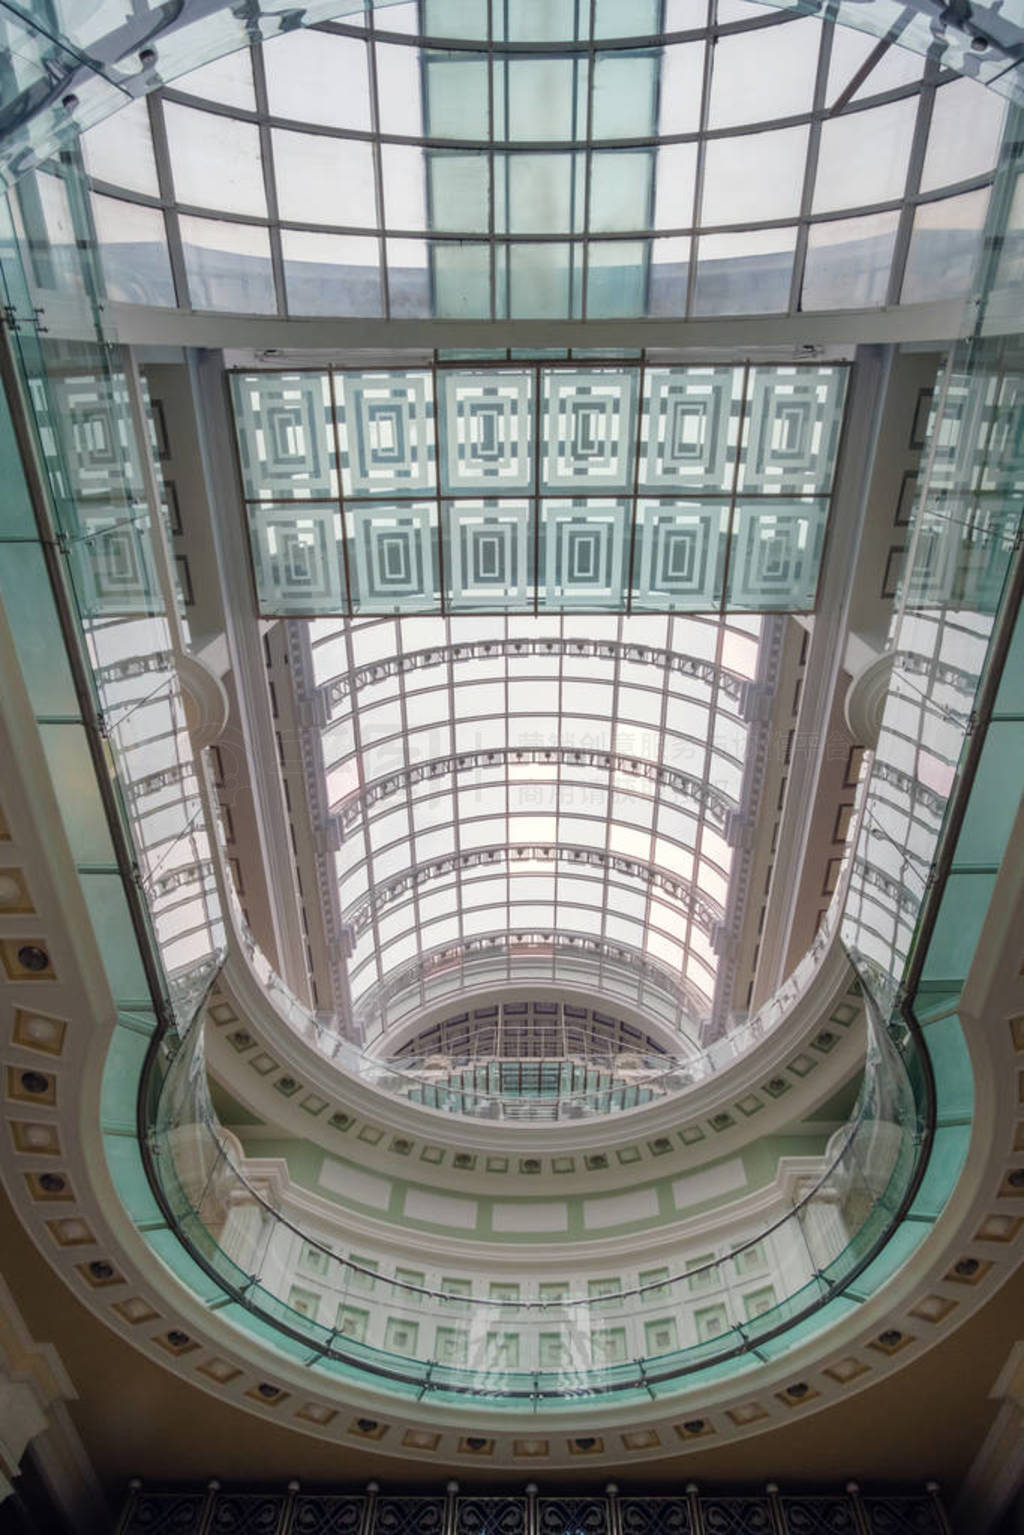 View of the transparent glass ceiling